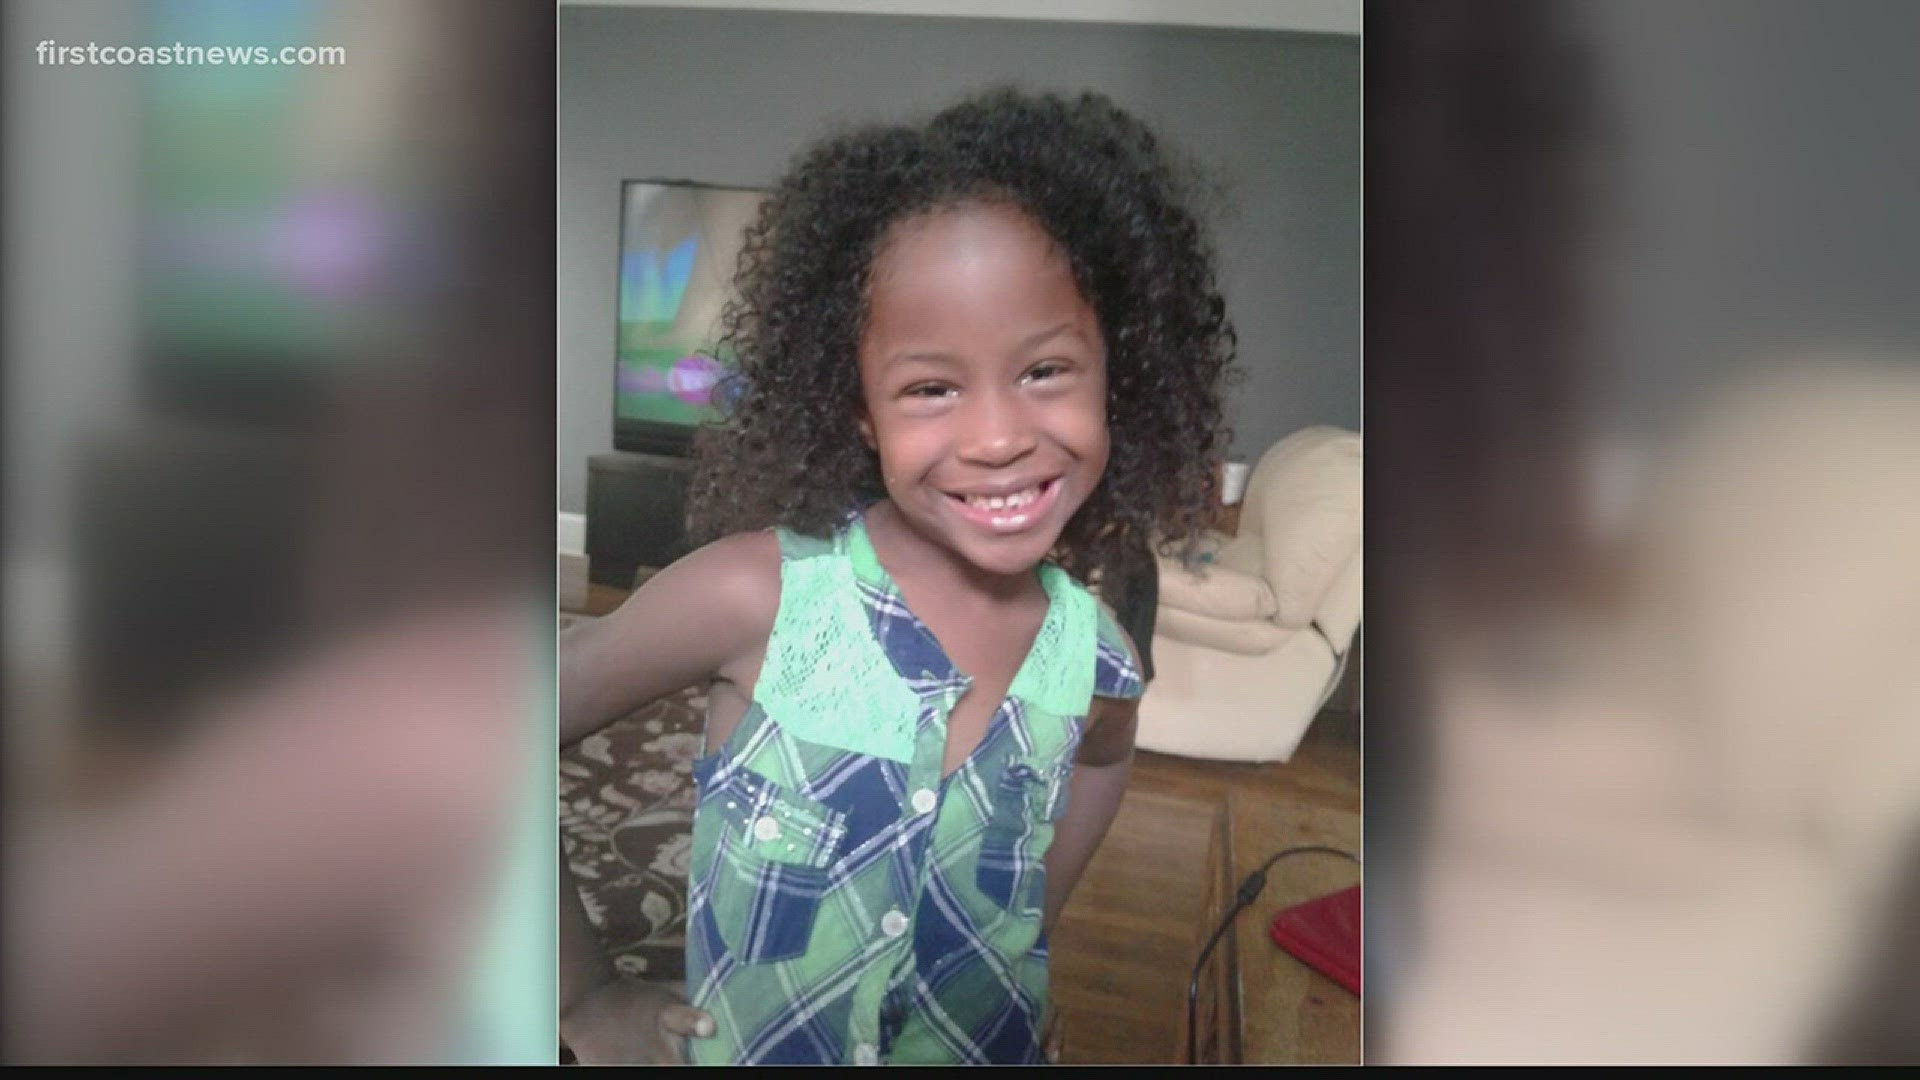 A service will be held at 11 a.m. Saturday for 6-year-old Jaelah Smith - a little girl killed by a pit bull. Jaelah's family says the event will be held at Wayman Temple and the public is invited.